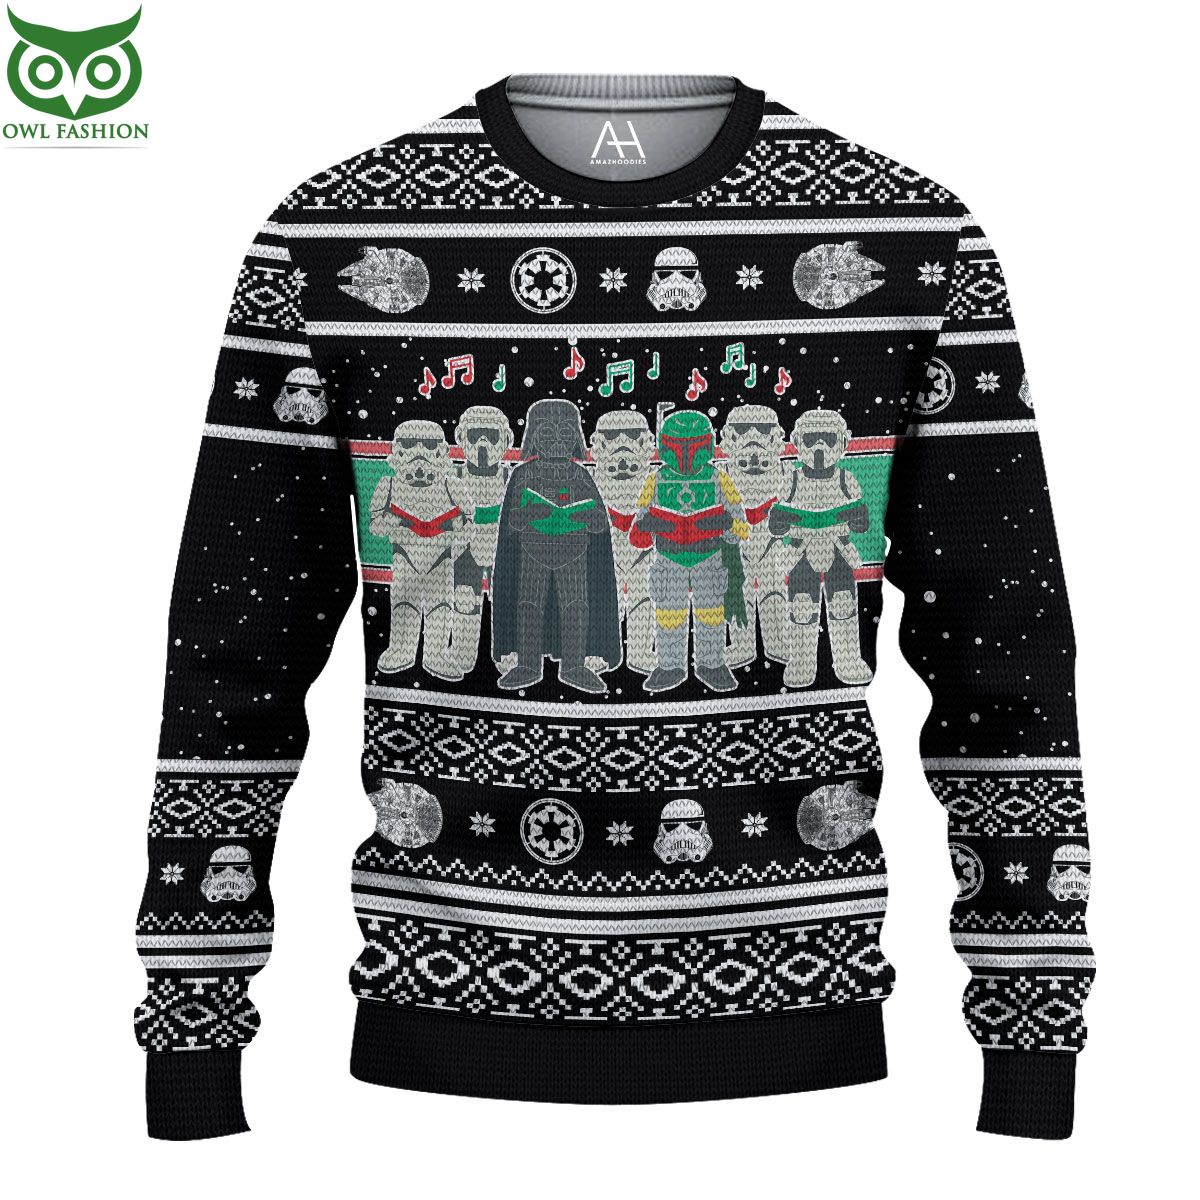 amazing star wars ugly sweaters 3d aop ugly sweater jumper 1 B5naS.jpg